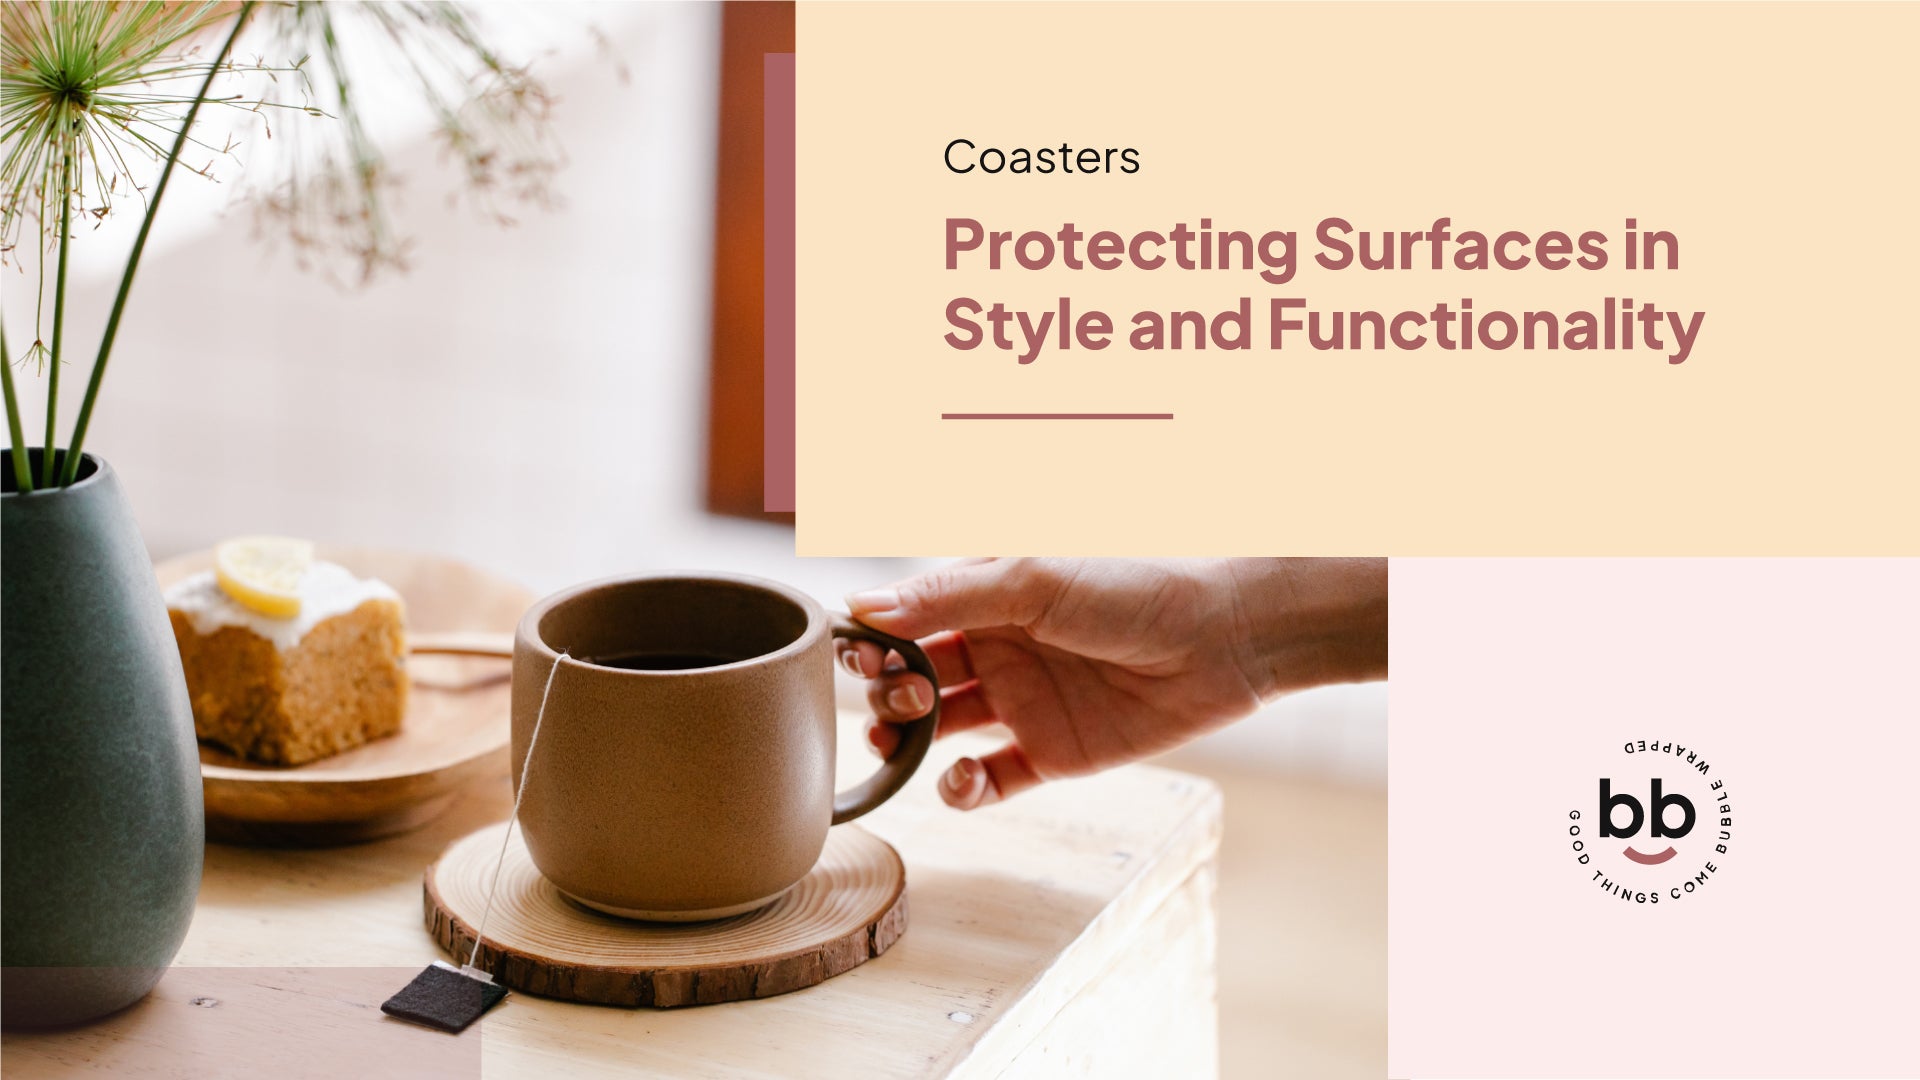 Coasters: Protecting Surfaces in Style and Functionality